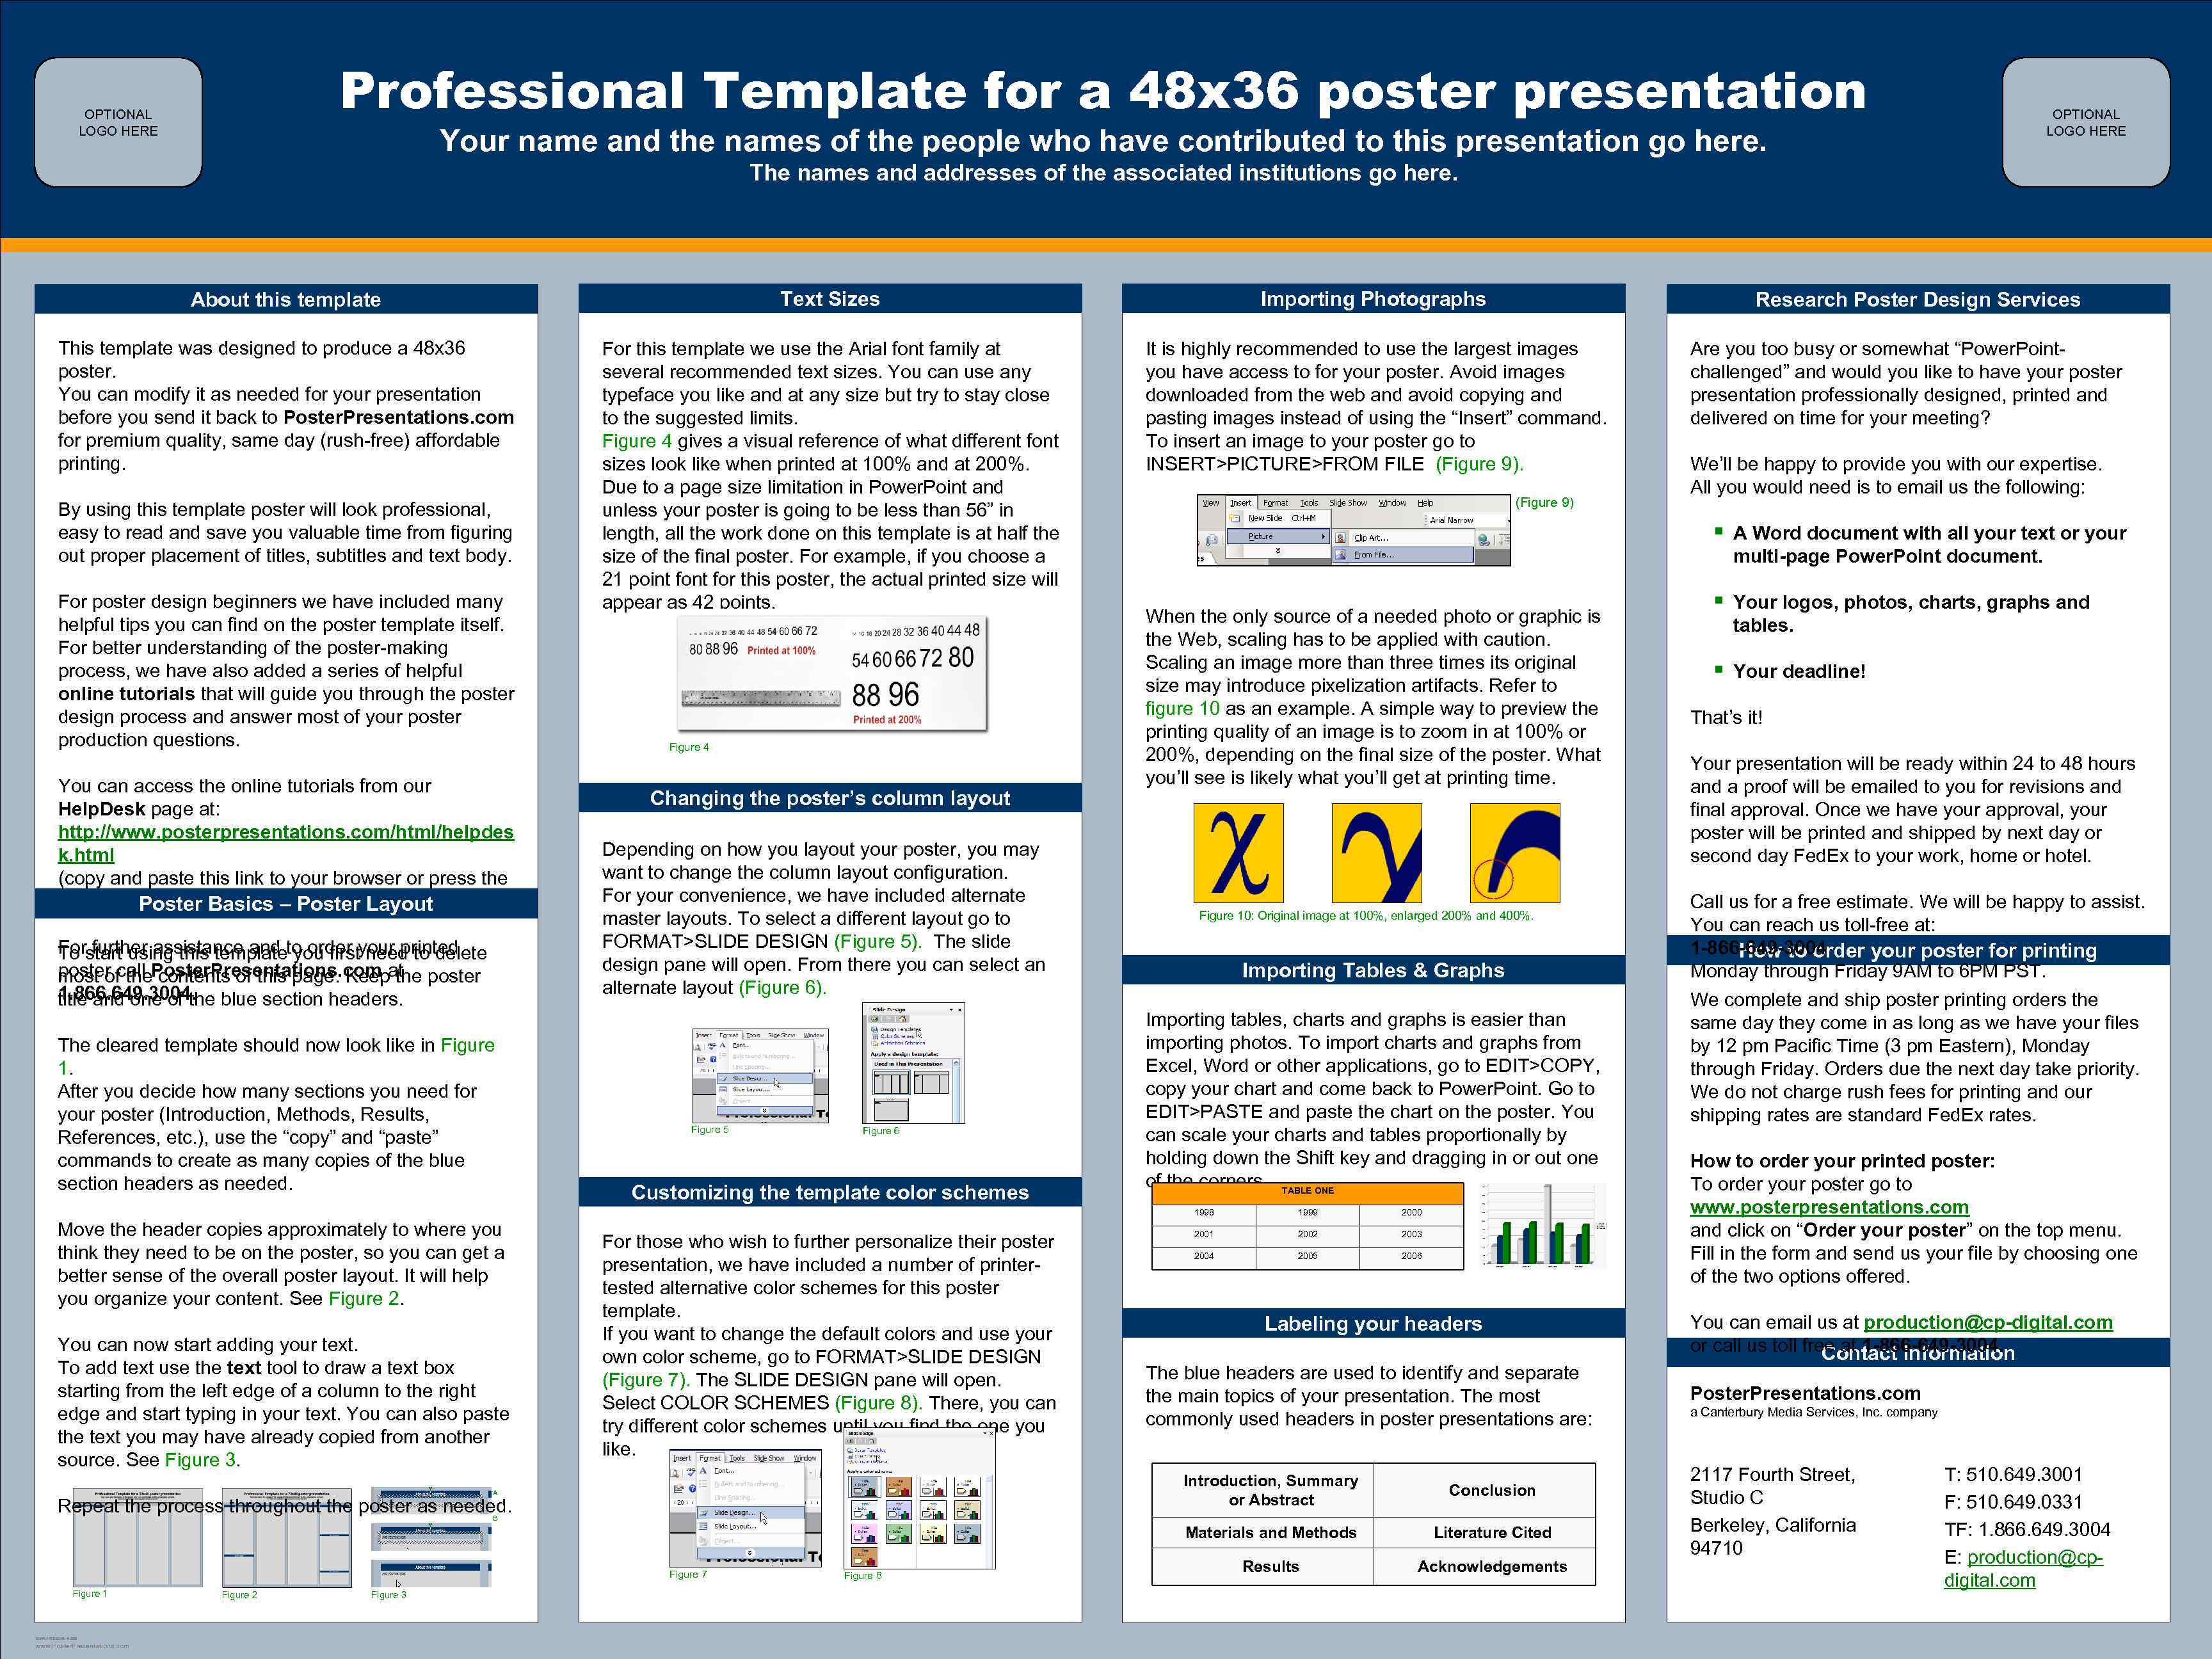 Professional Template for a 48 x 36 poster